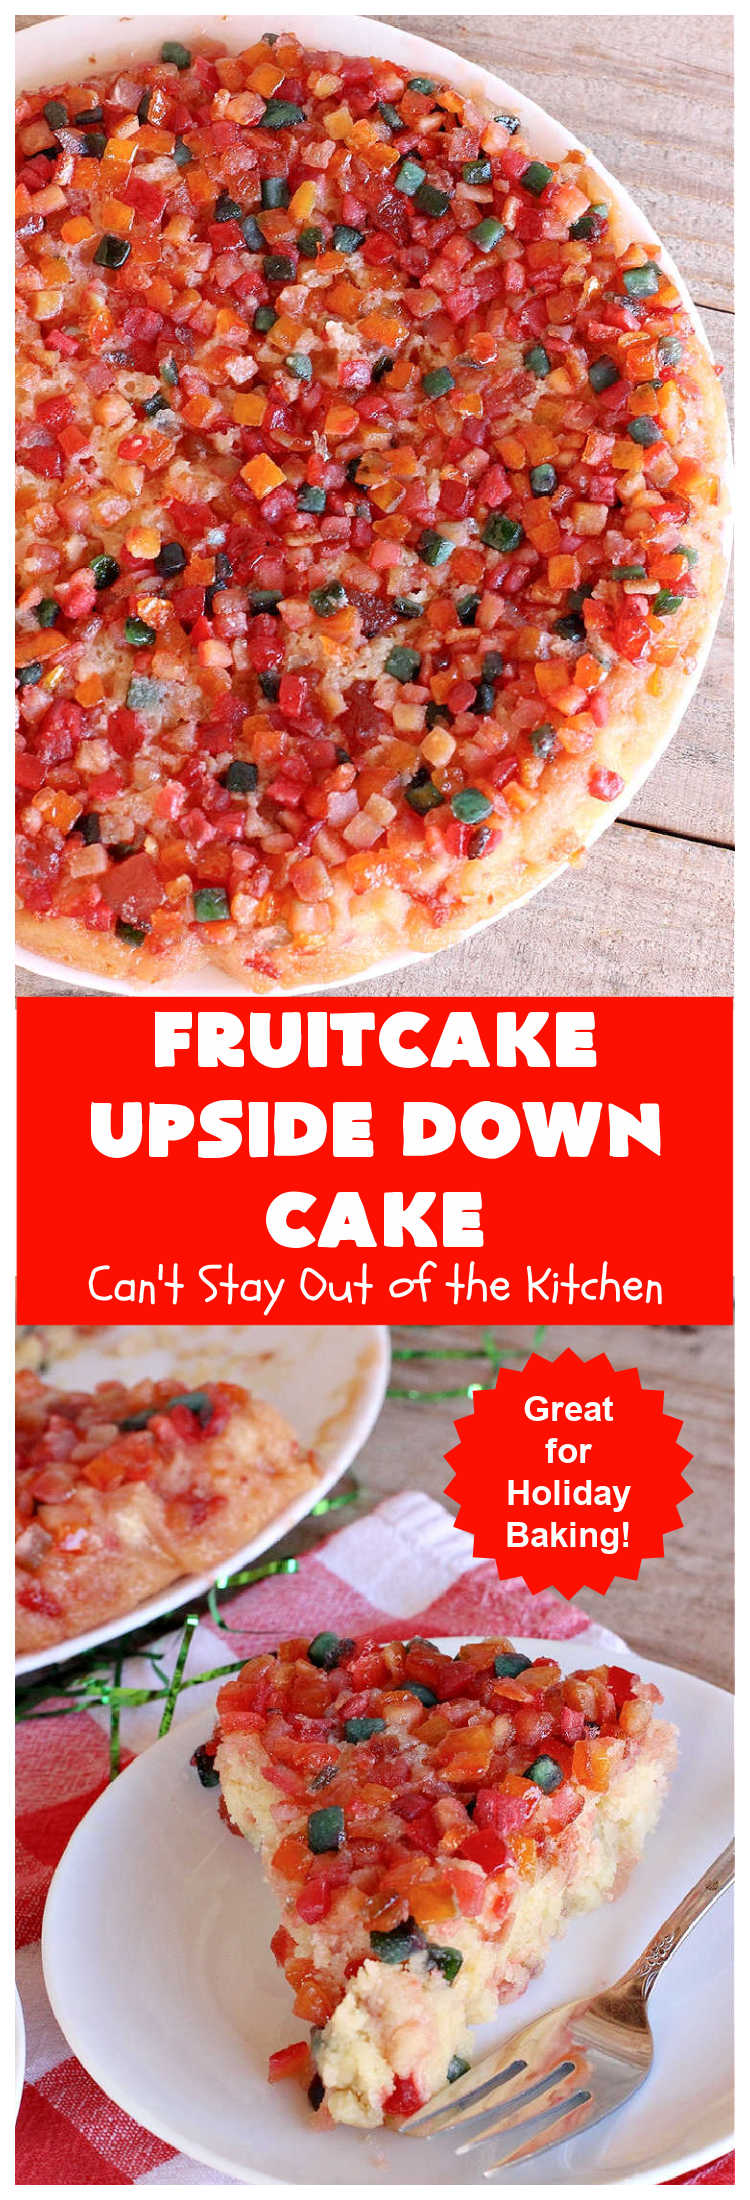 Fruitcake Upside Down Cake | Can't Stay Out of the Kitchen | this moist & delicious #cake is nothing like traditional #Fruitcake. This #UpsideDownCake is moist, drool-worthy & full of flavor. It will wow your #holiday company & friends. Beautiful, elegant & festive enough for any holiday party or gala. #HolidayDessert #FruitcakeDessert #FruitcakeUpsideDownCake #ParadiseCandiedFruit #ParadiseFruitCompany